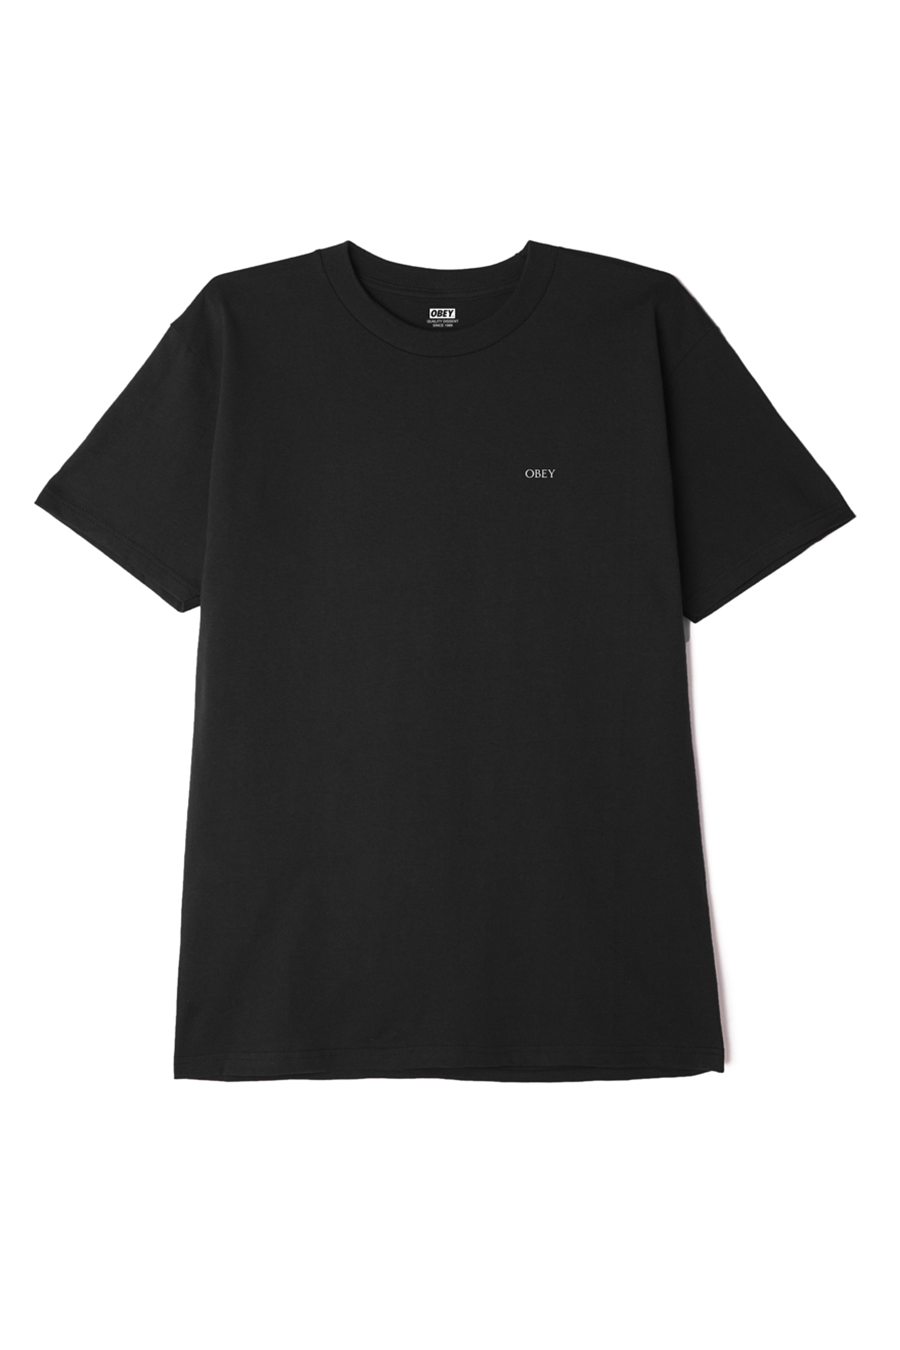 Big Brother Classic Tee | Black - Main Image Number 2 of 2